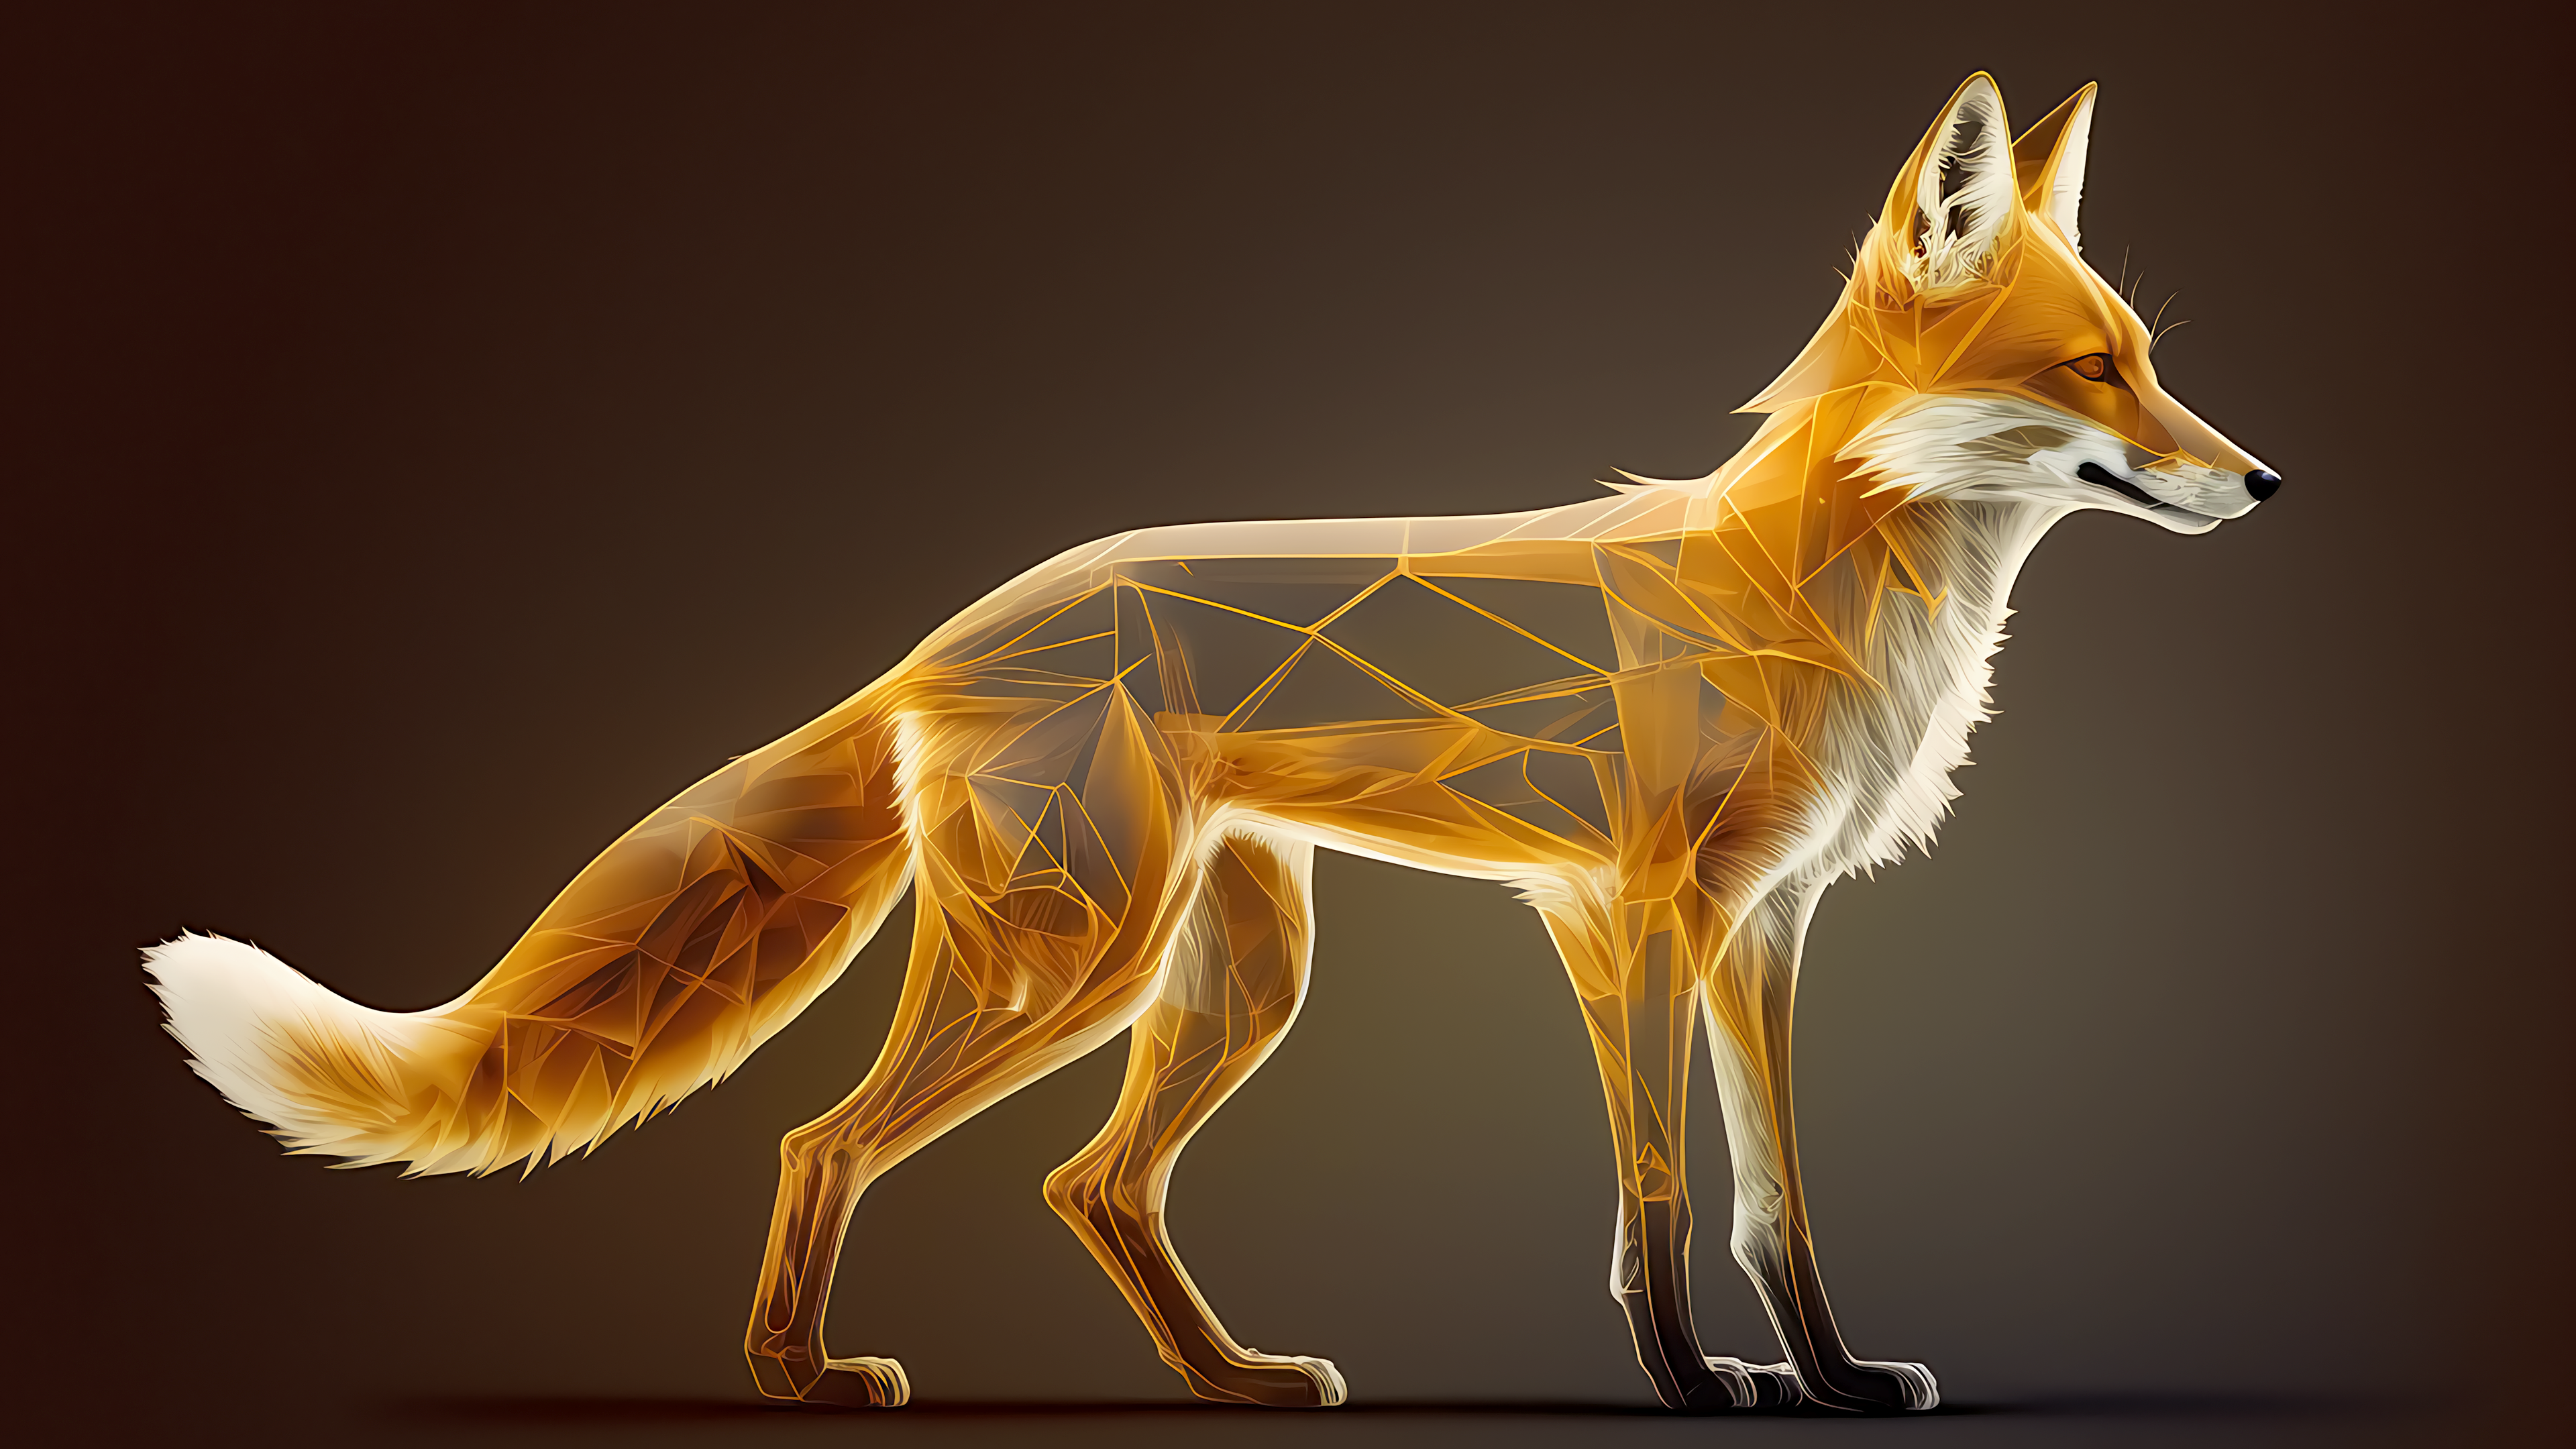 General 3840x2160 minimalism AI art simple background nature wireframe translucent transparency fox